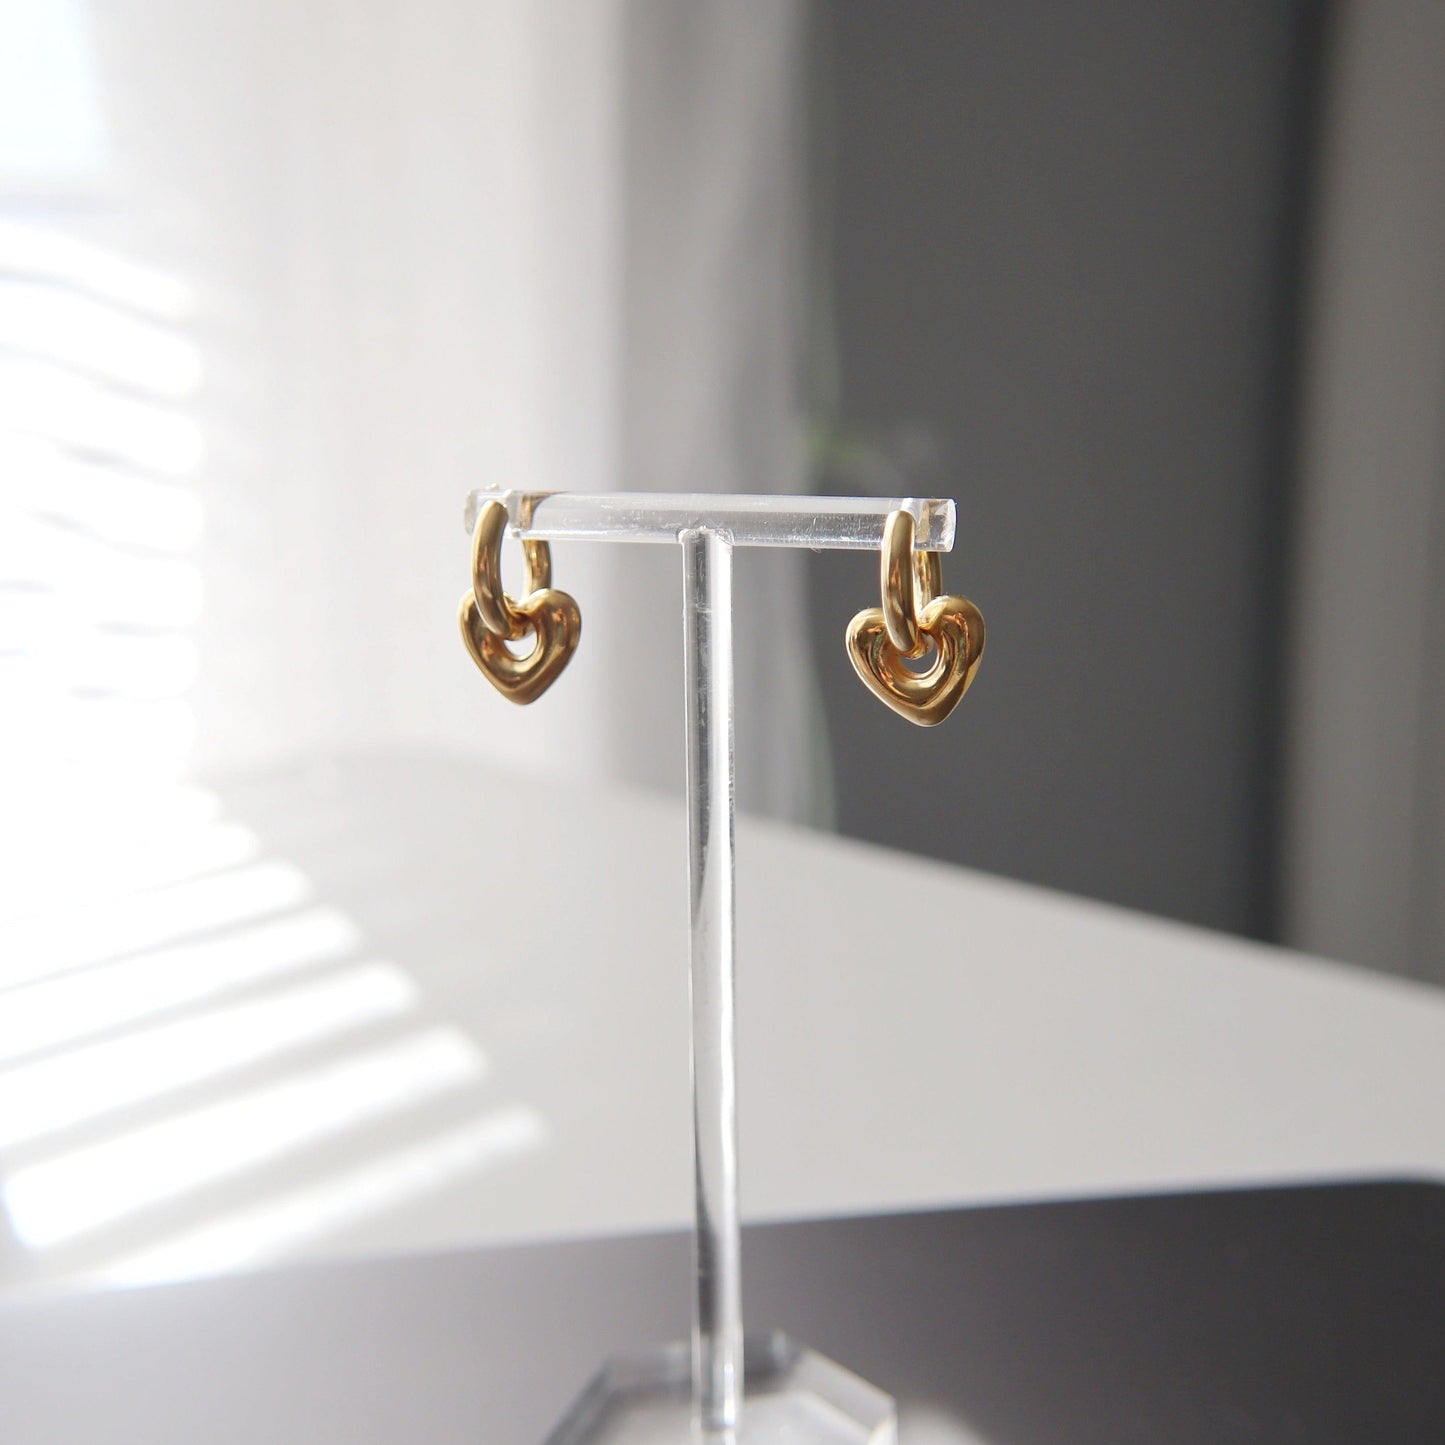 Puffy Heart Hoop Earrings - JESSA JEWELRY | GOLD JEWELRY; dainty, affordable gold everyday jewelry. Tarnish free, water-resistant, hypoallergenic. Jewelry for everyday wear